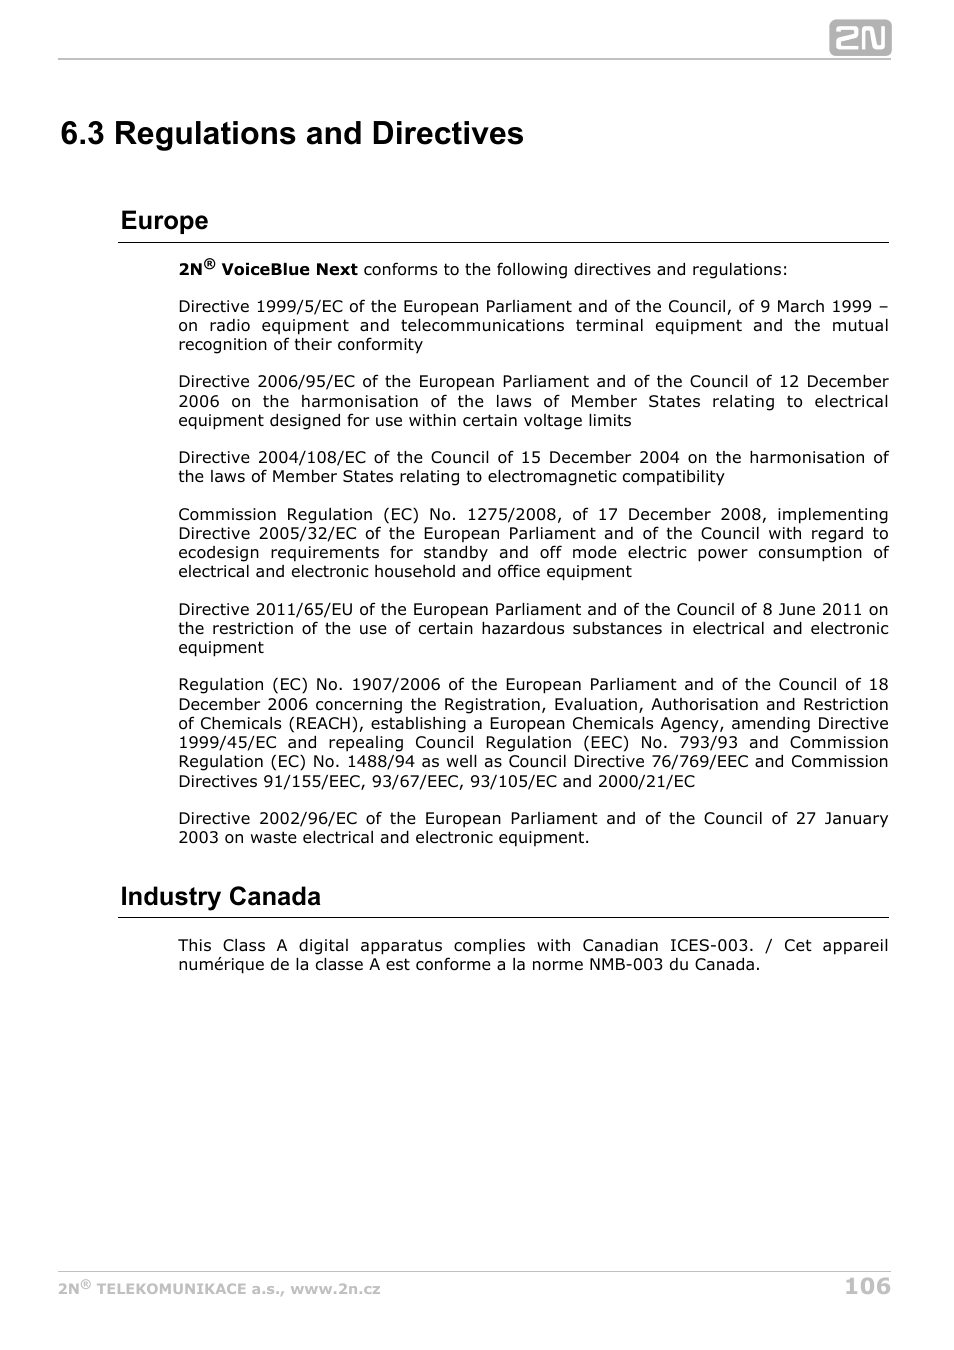 3 regulations and directives, Europe, Industry canada | 2N VoiceBlue Next v3.6 User Manual | Page 106 / 110